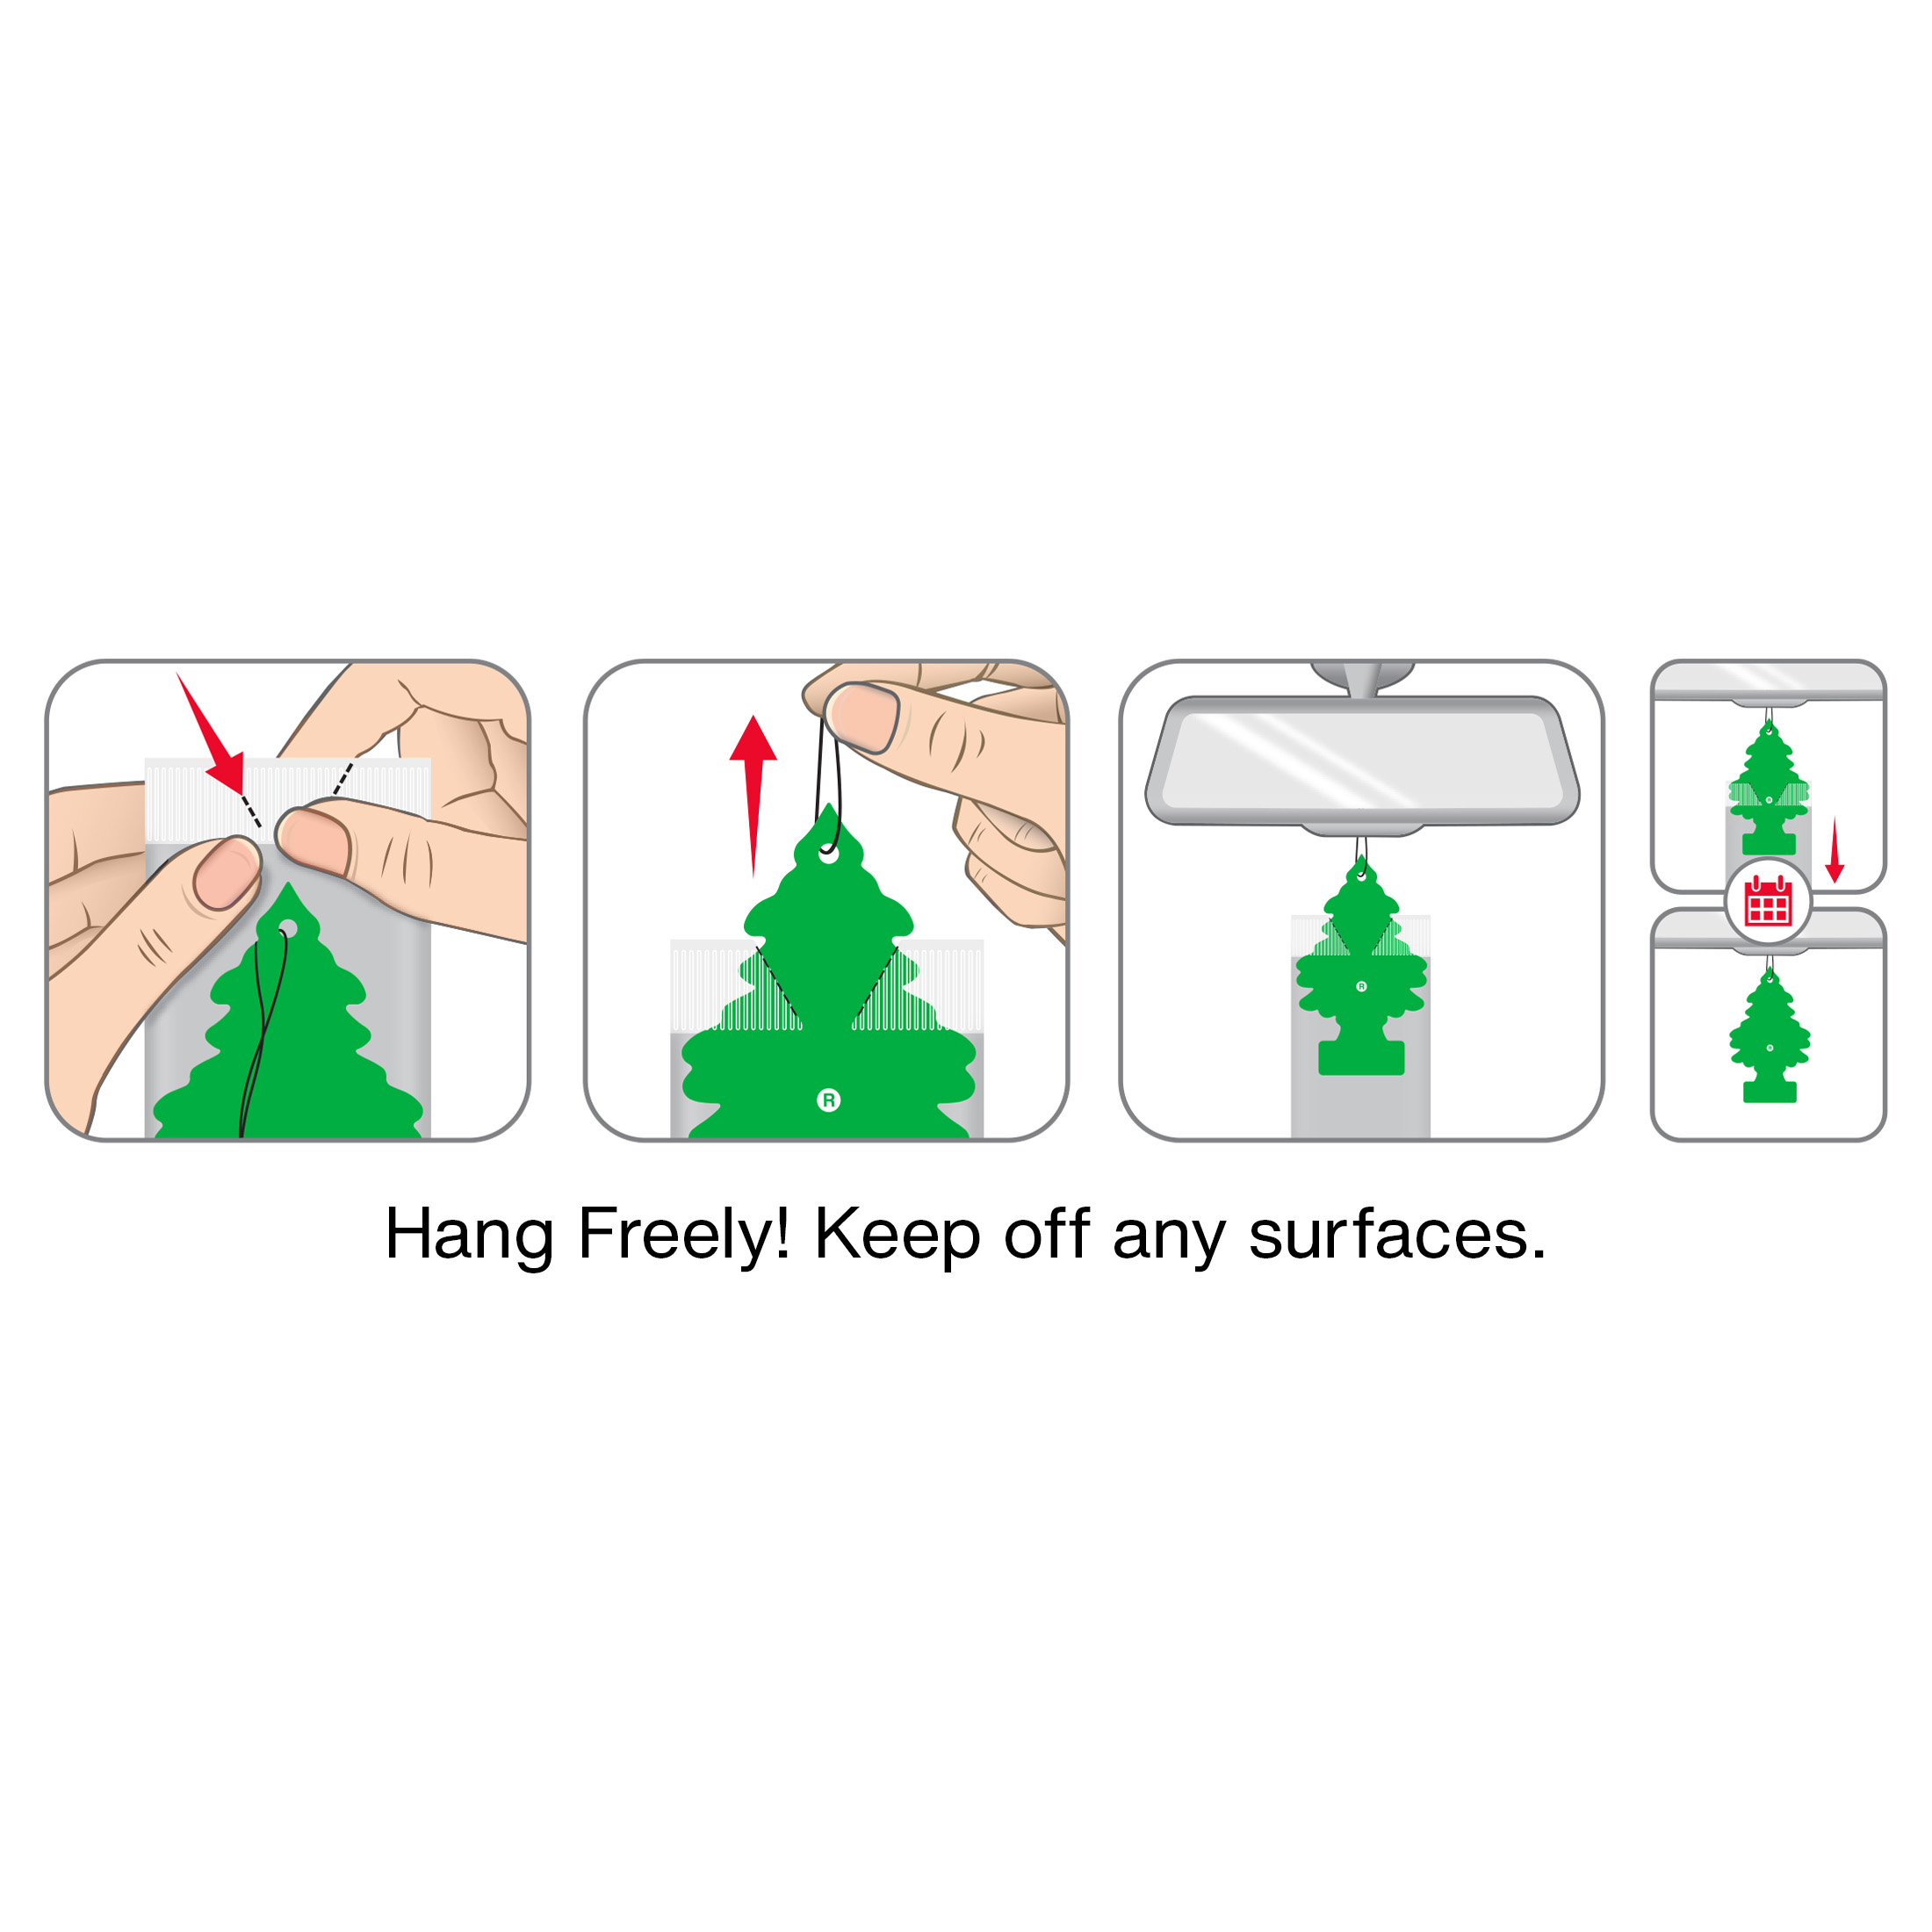 Little Trees Auto Air Freshener, Hanging Card, New Car Scent Fragrance 3-Pack - image 5 of 9